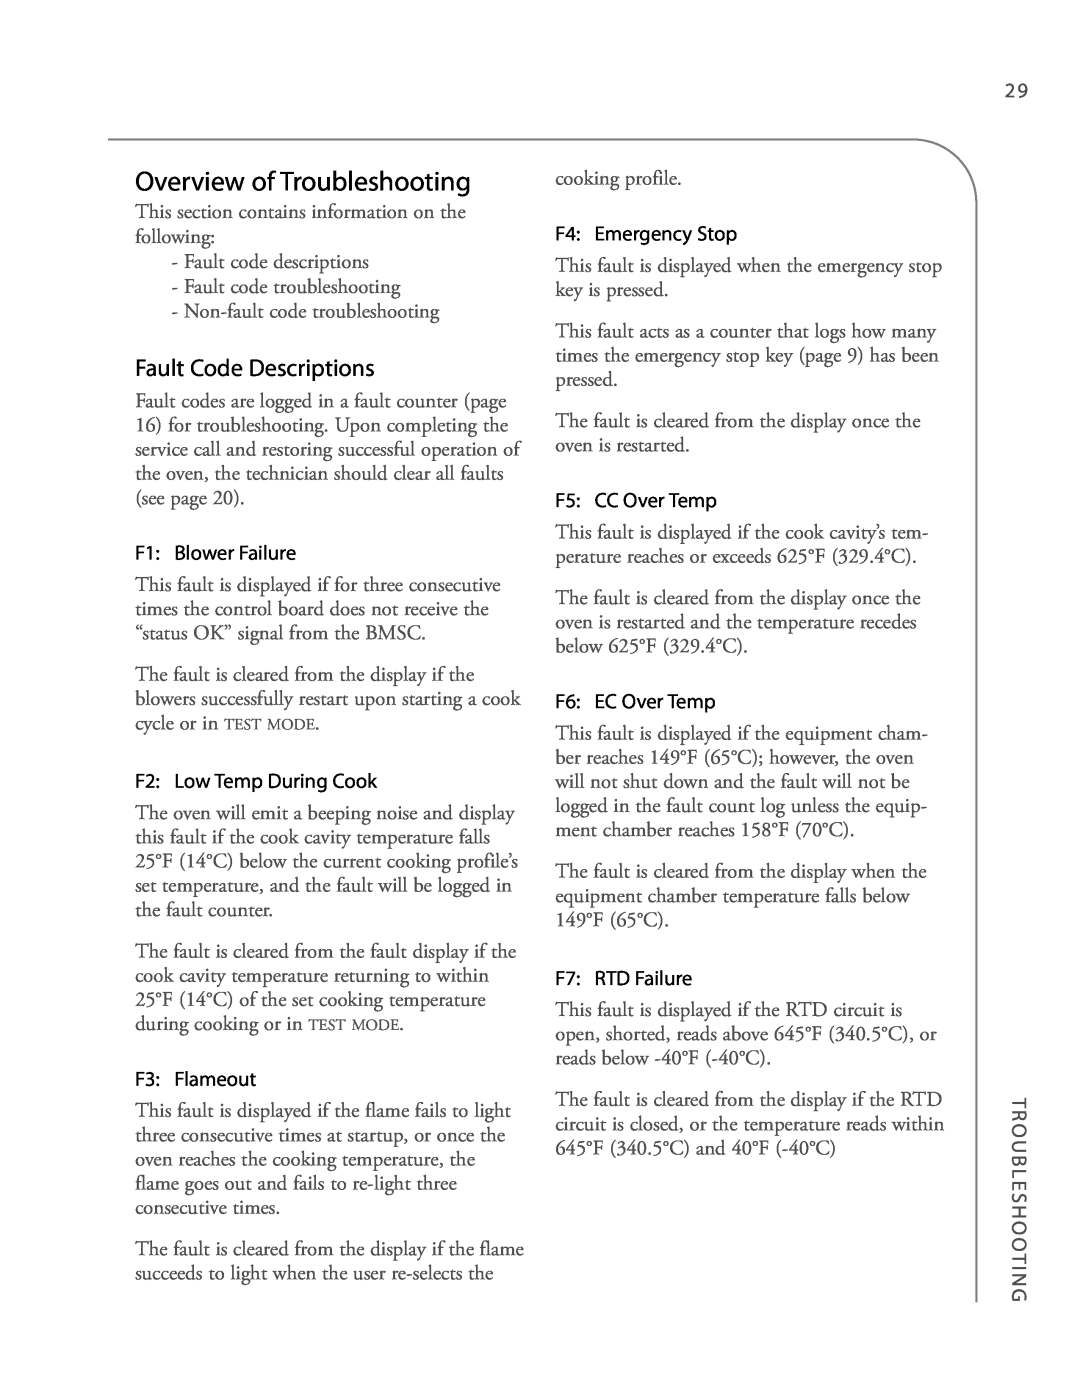 Turbo Chef Technologies 3240 manual Overview of Troubleshooting, Fault Code Descriptions 